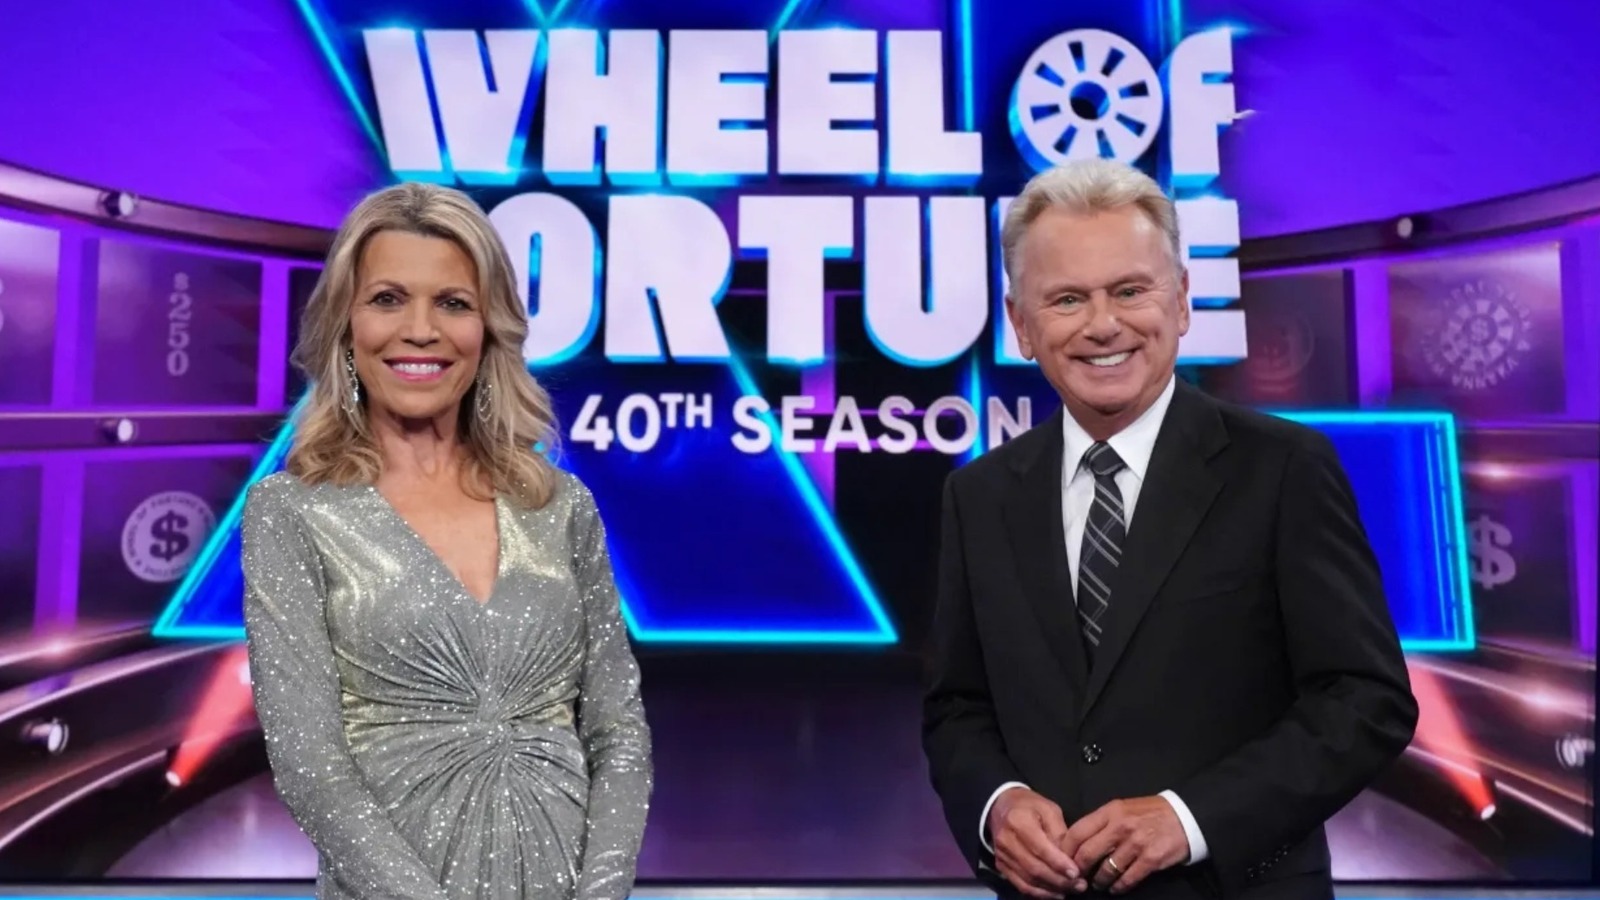 Pat Sajak says goodbye to the Wheel of Fortune after 41 seasons